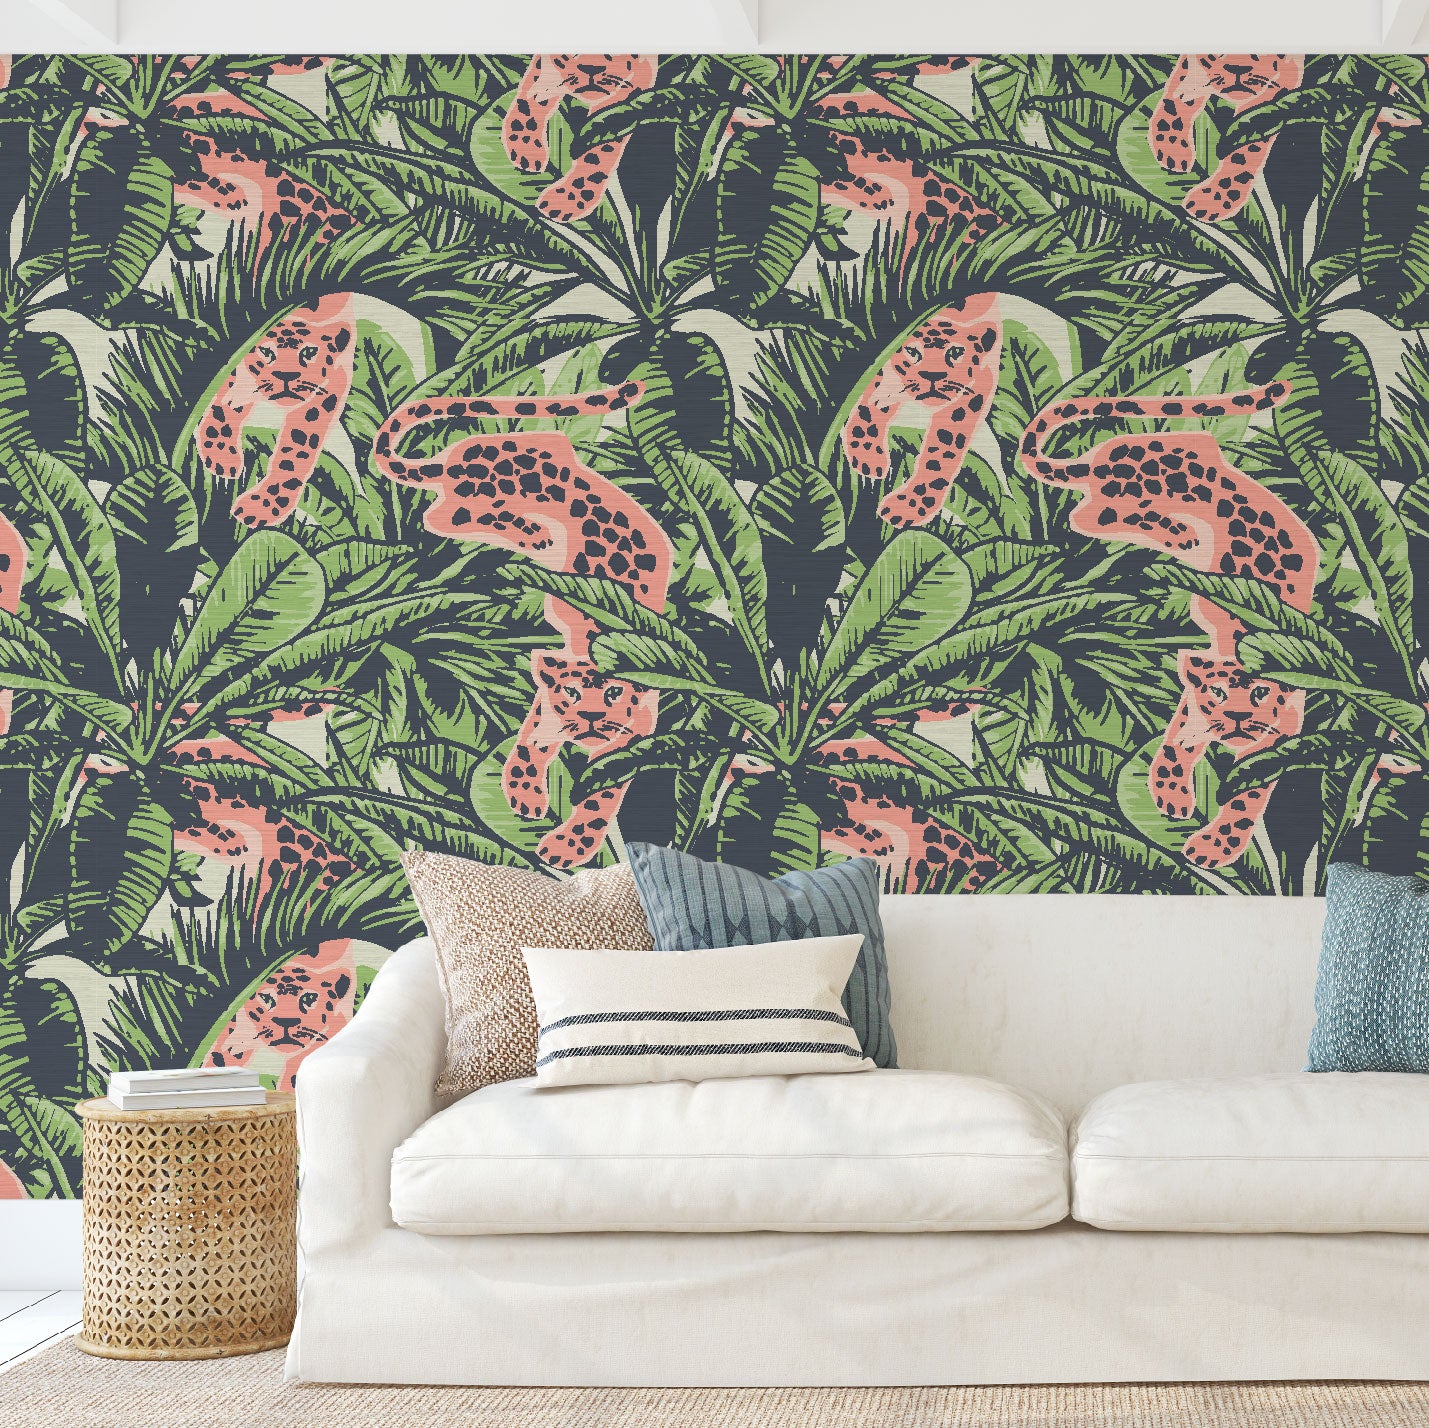 Load image into Gallery viewer, Living room with grasscloth printed wallpaper on off white base with allover palm prints in a variety of leaf shapes and variatals. Print includes neon cheetah in a paper cutout artwork aesthetic creeping through the palm leafs and locking eyes with the viewer.
